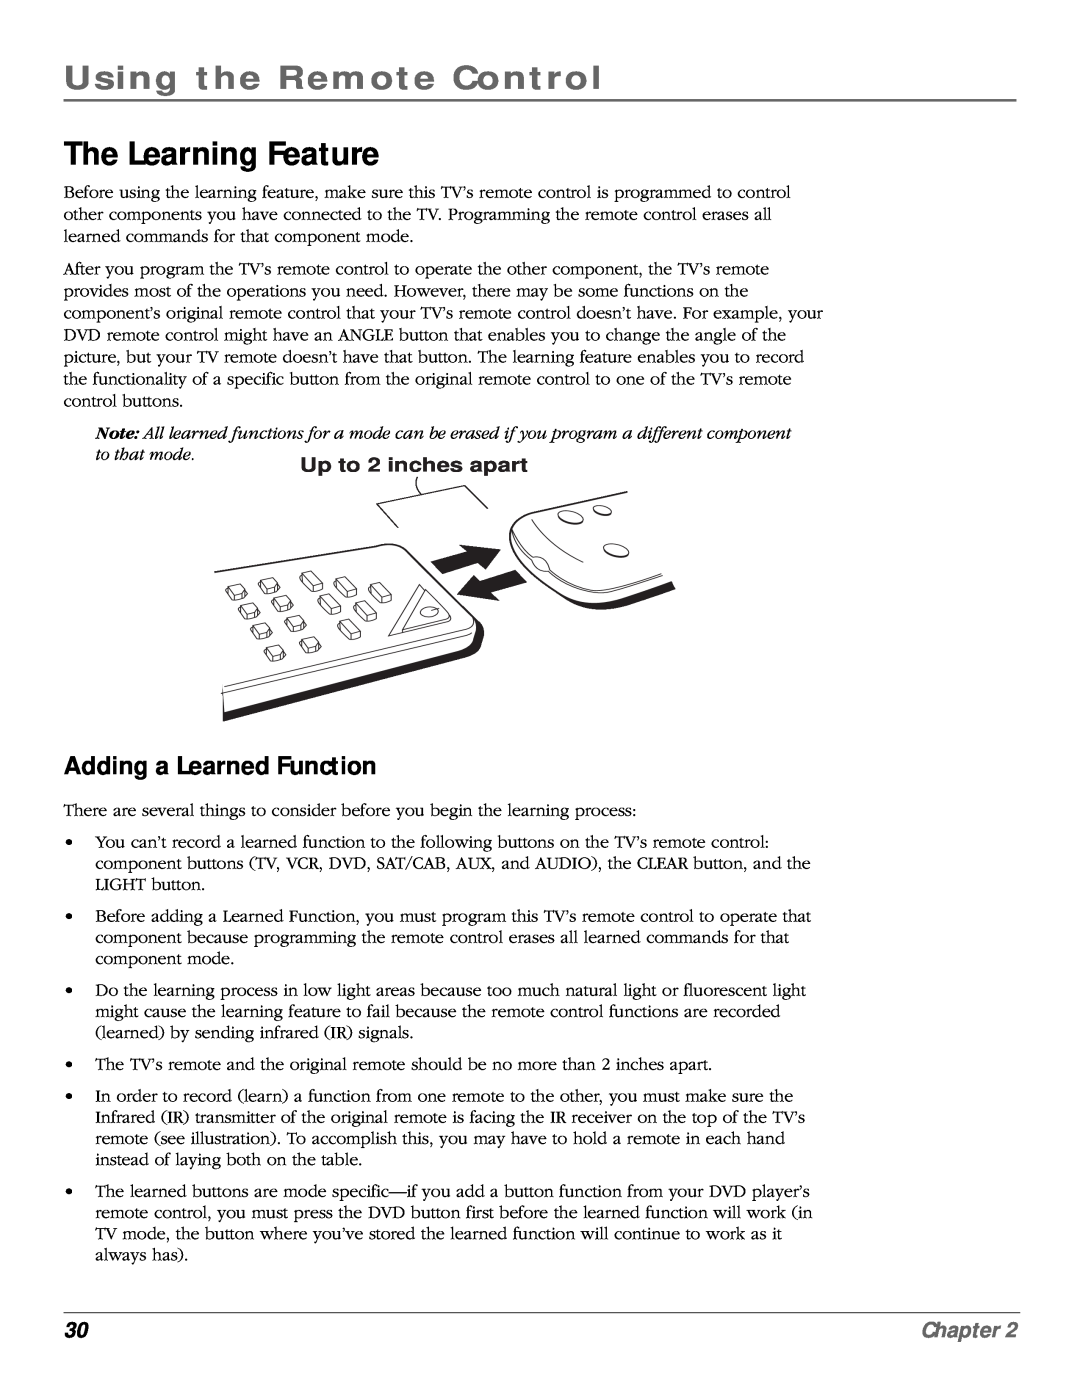 RCA scenium manual The Learning Feature, Adding a Learned Function, Using the Remote Control, Chapter 